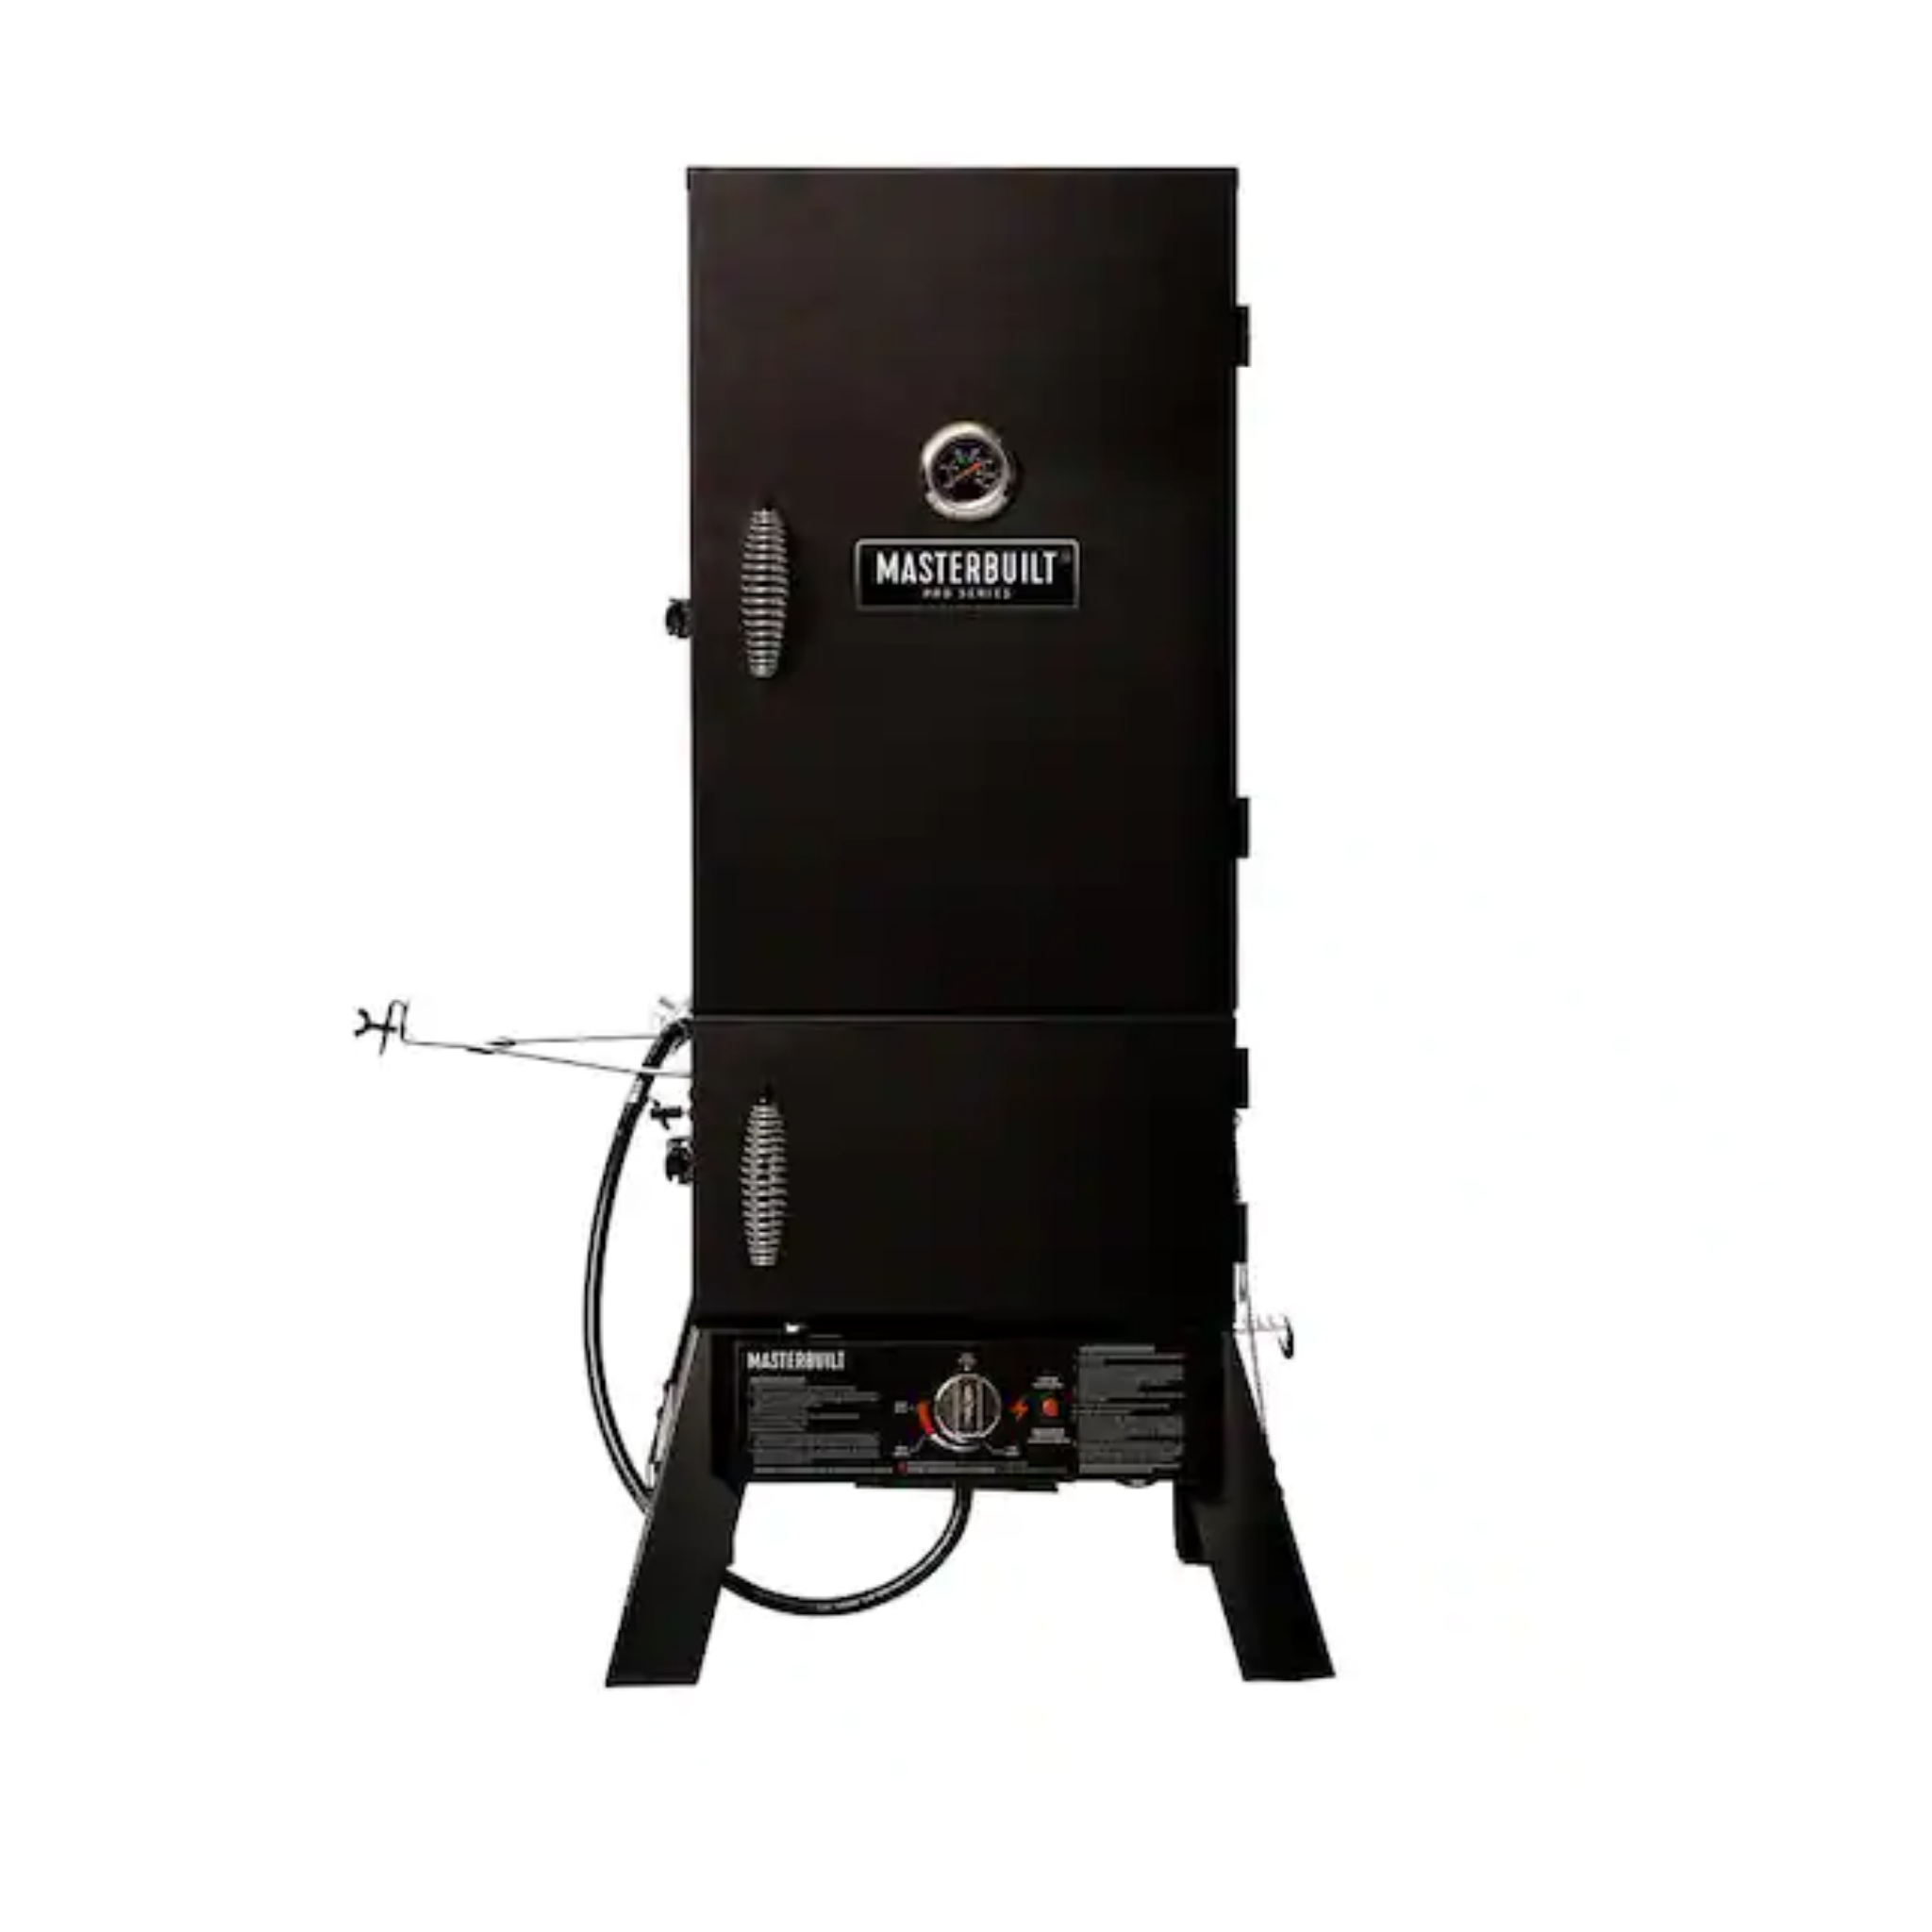 Masterbuilt 30 in. Dual Fuel Propane Gas and Charcoal Smoker